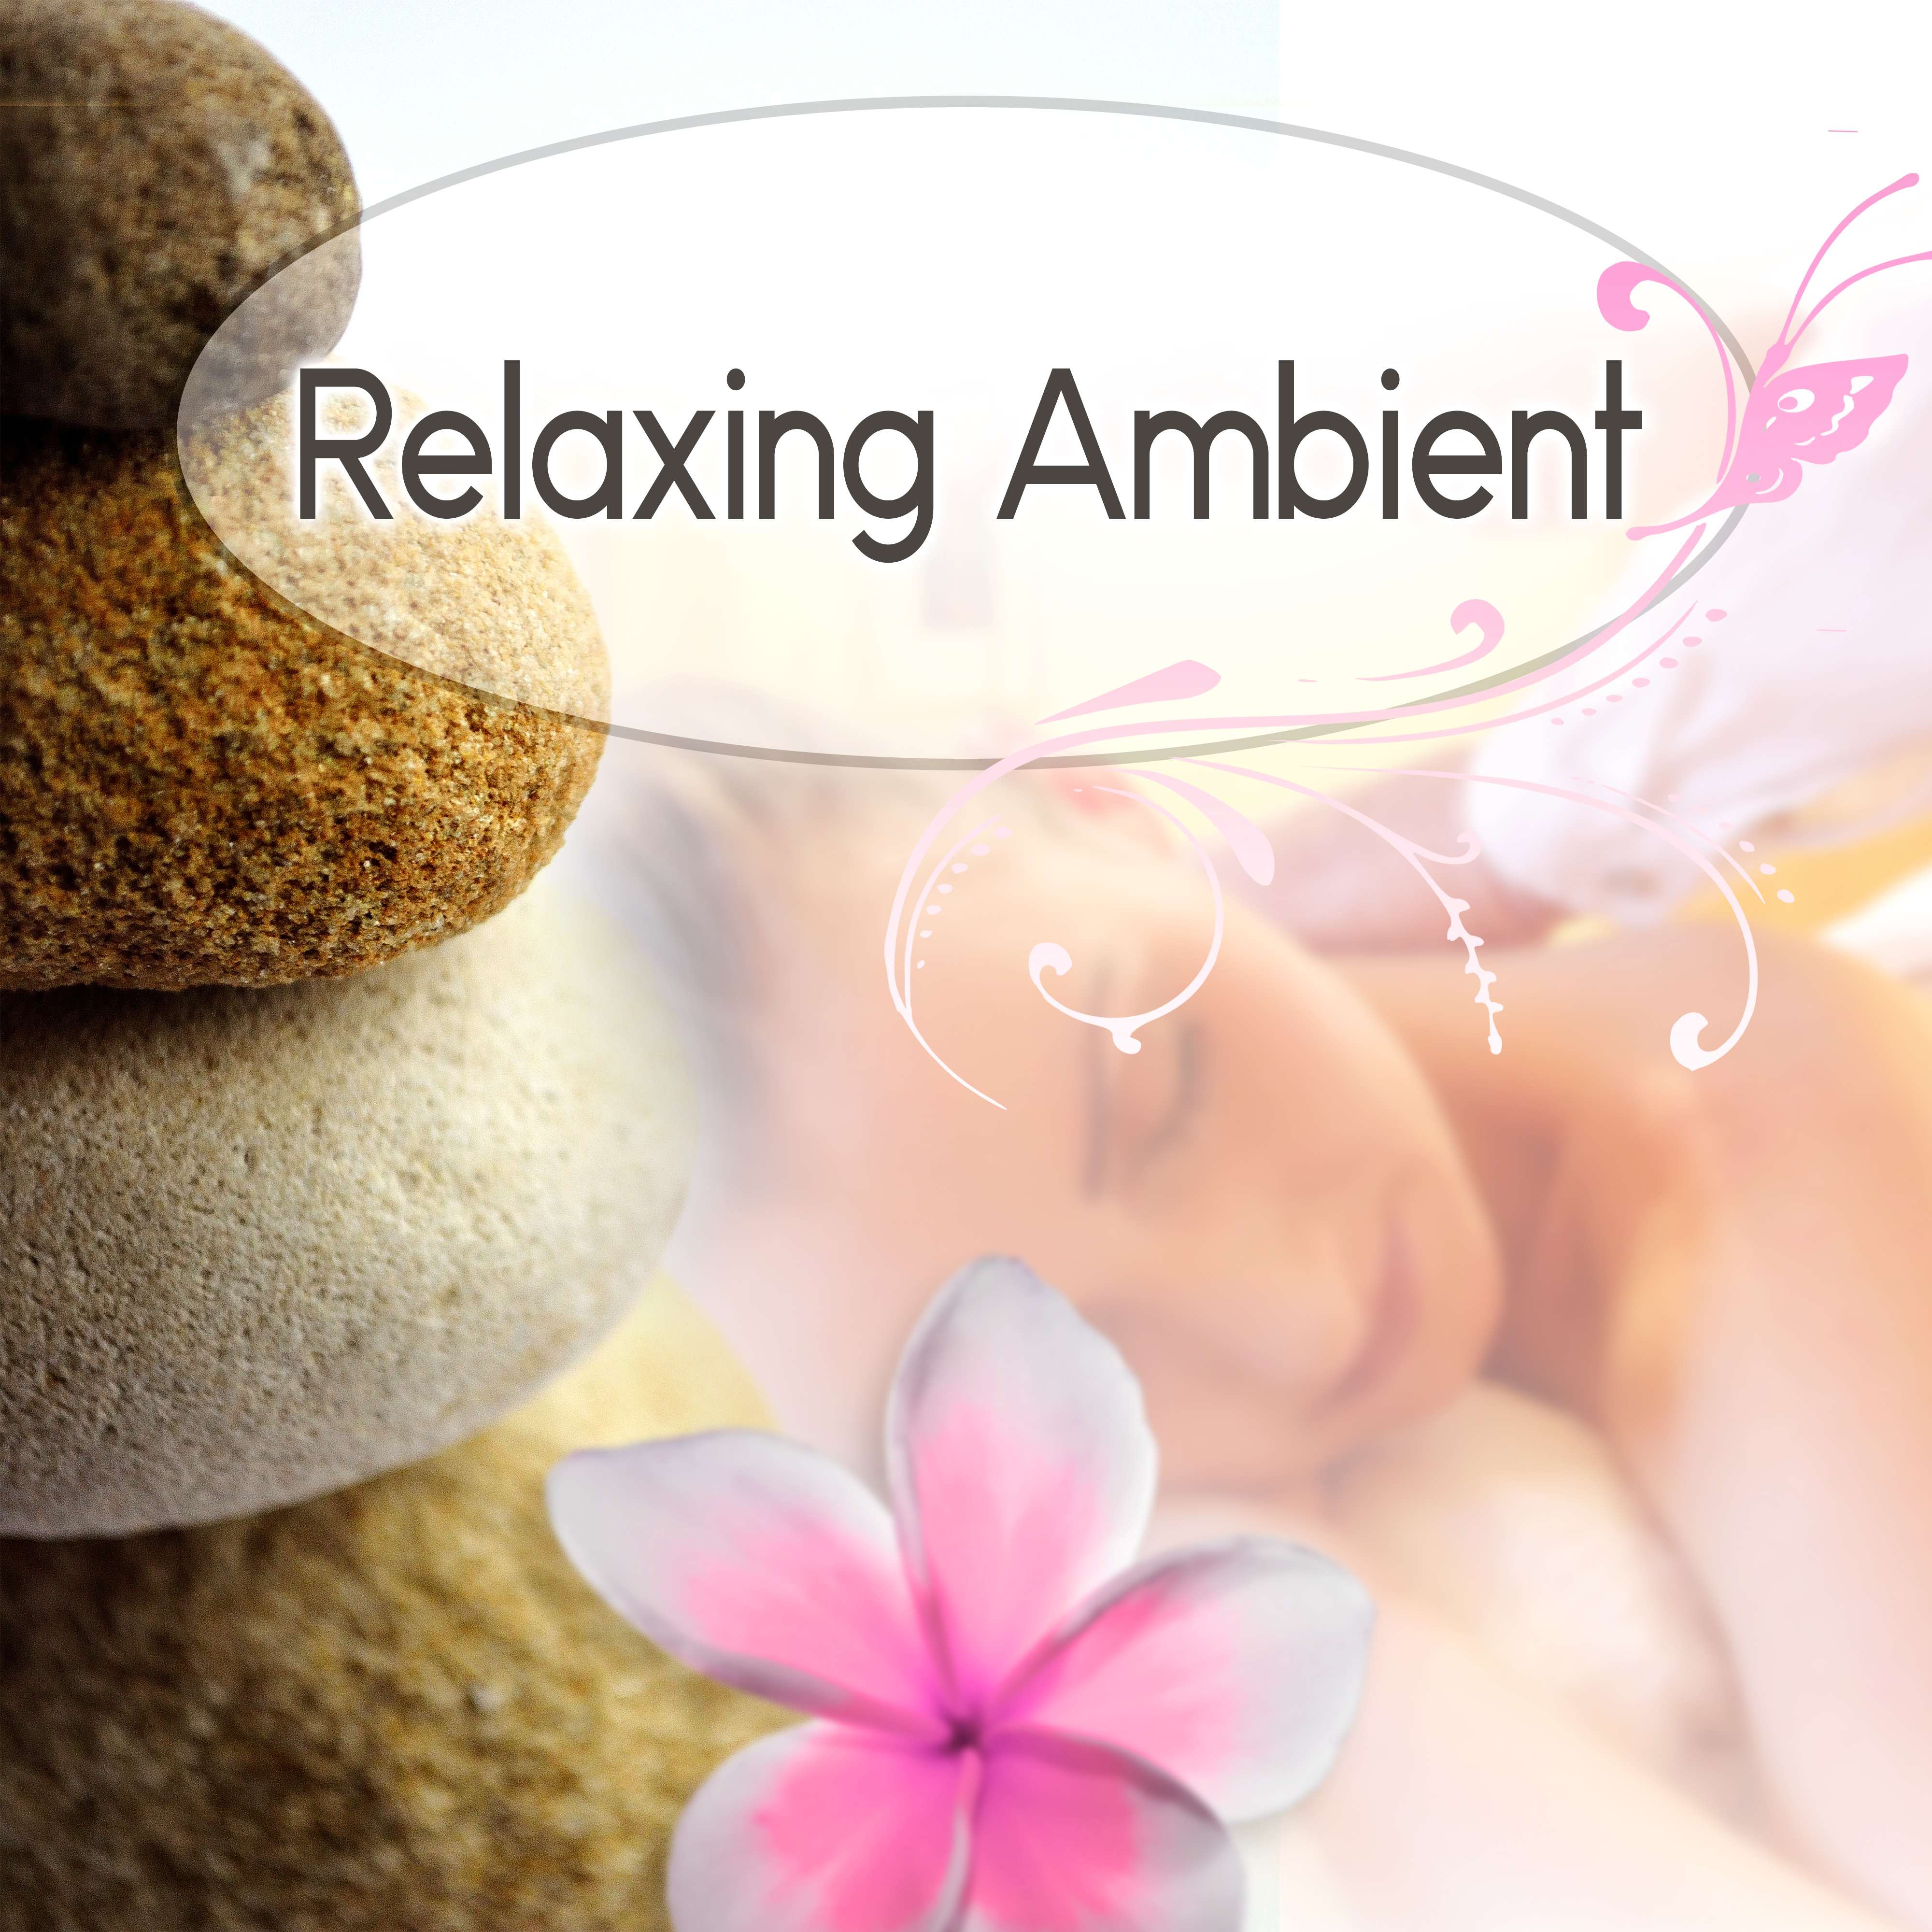 Relaxing Ambient – New Age, Spiritual Healing, Sounds of Nature, Massage, Spa, Wellness